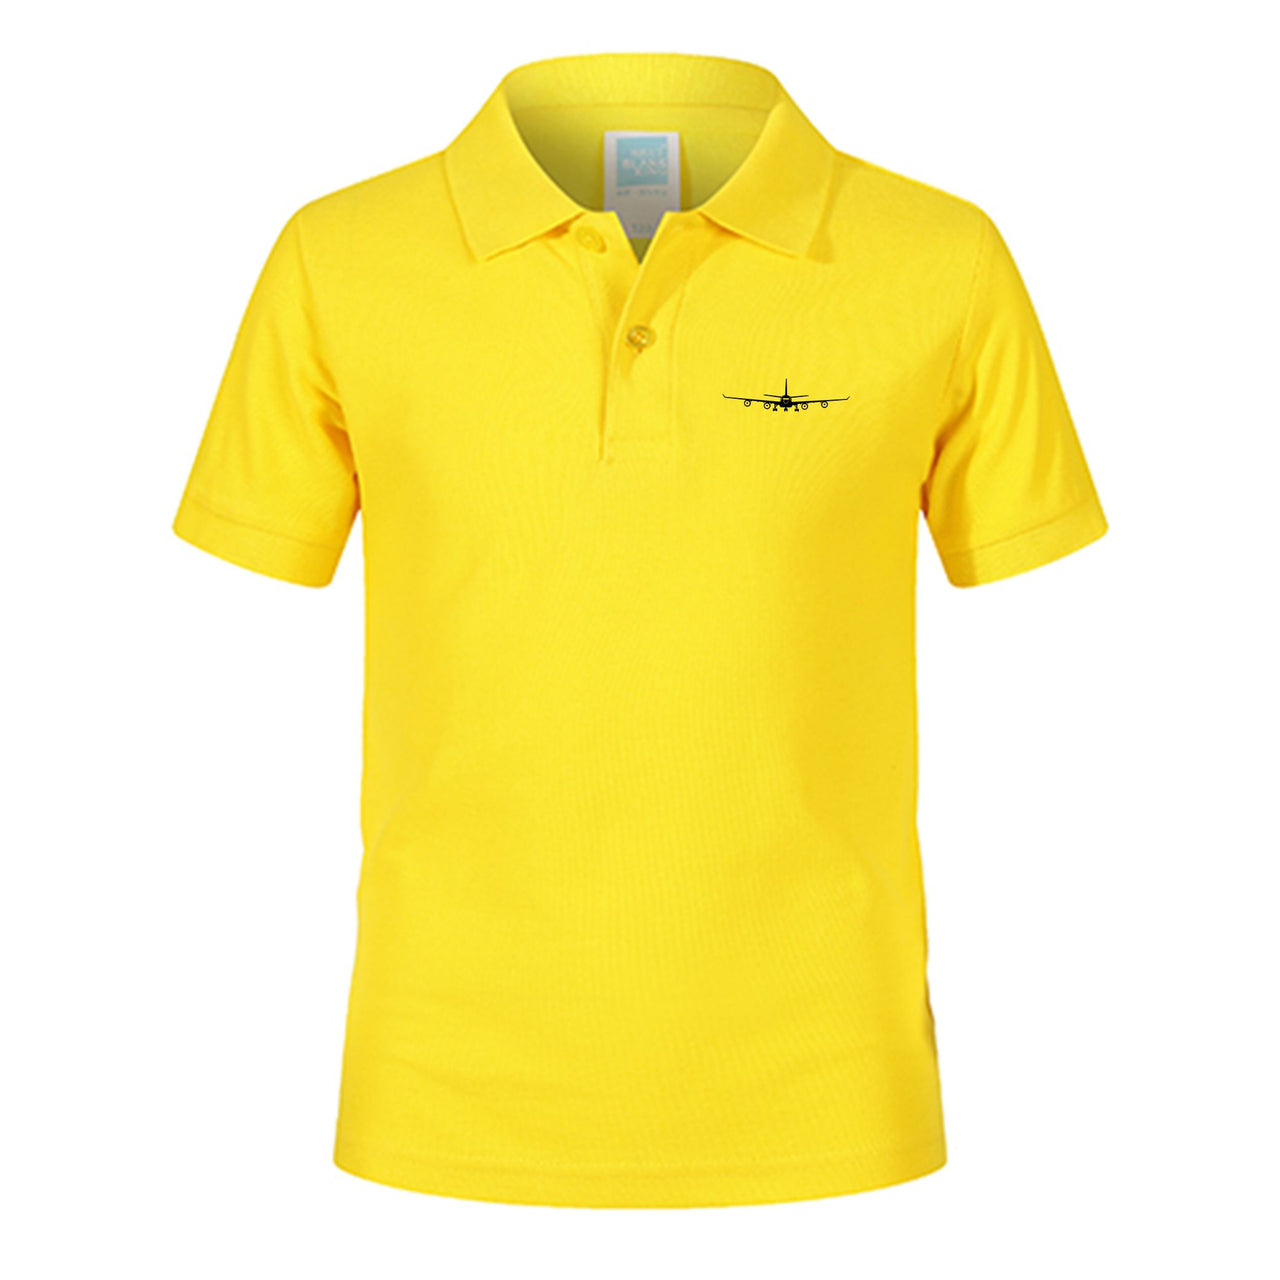 Airbus A340 Silhouette Designed Children Polo T-Shirts